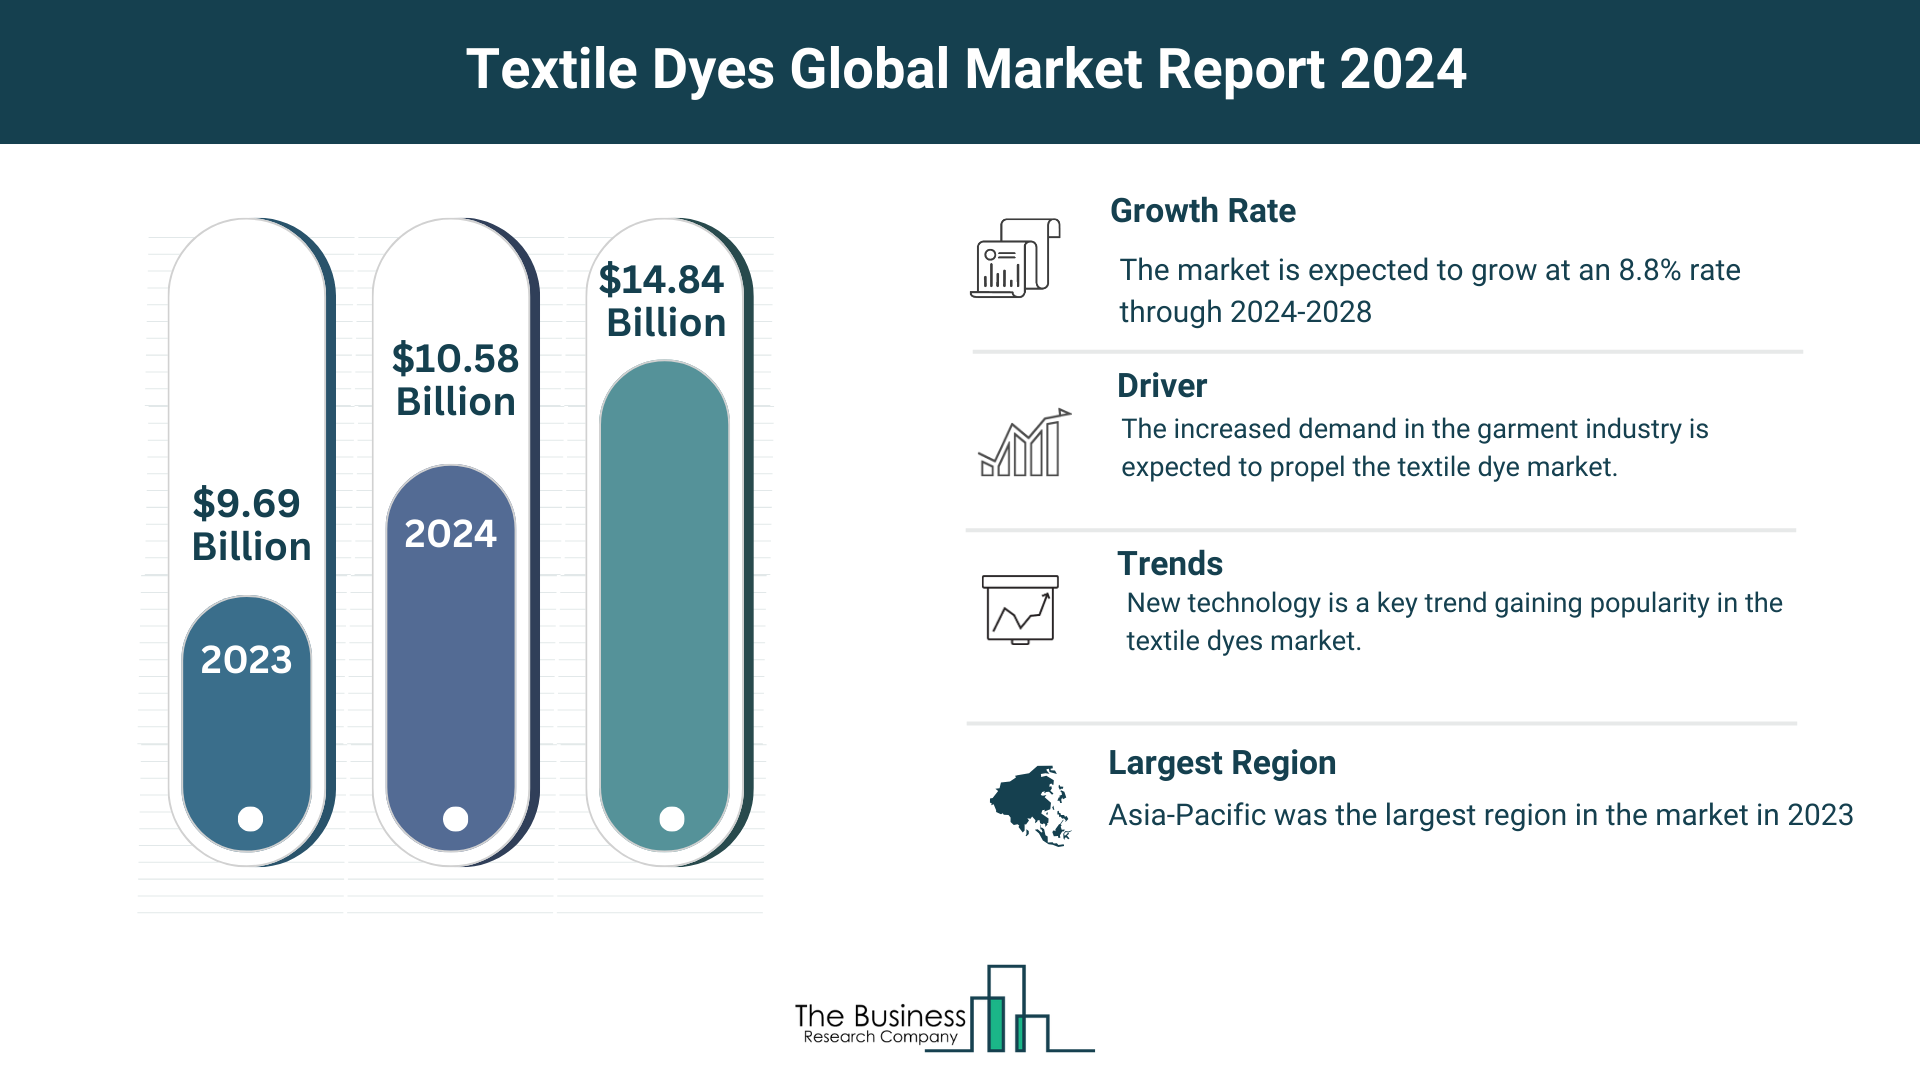 5 Major Insights Into The Textile Dyes Market Report 2024